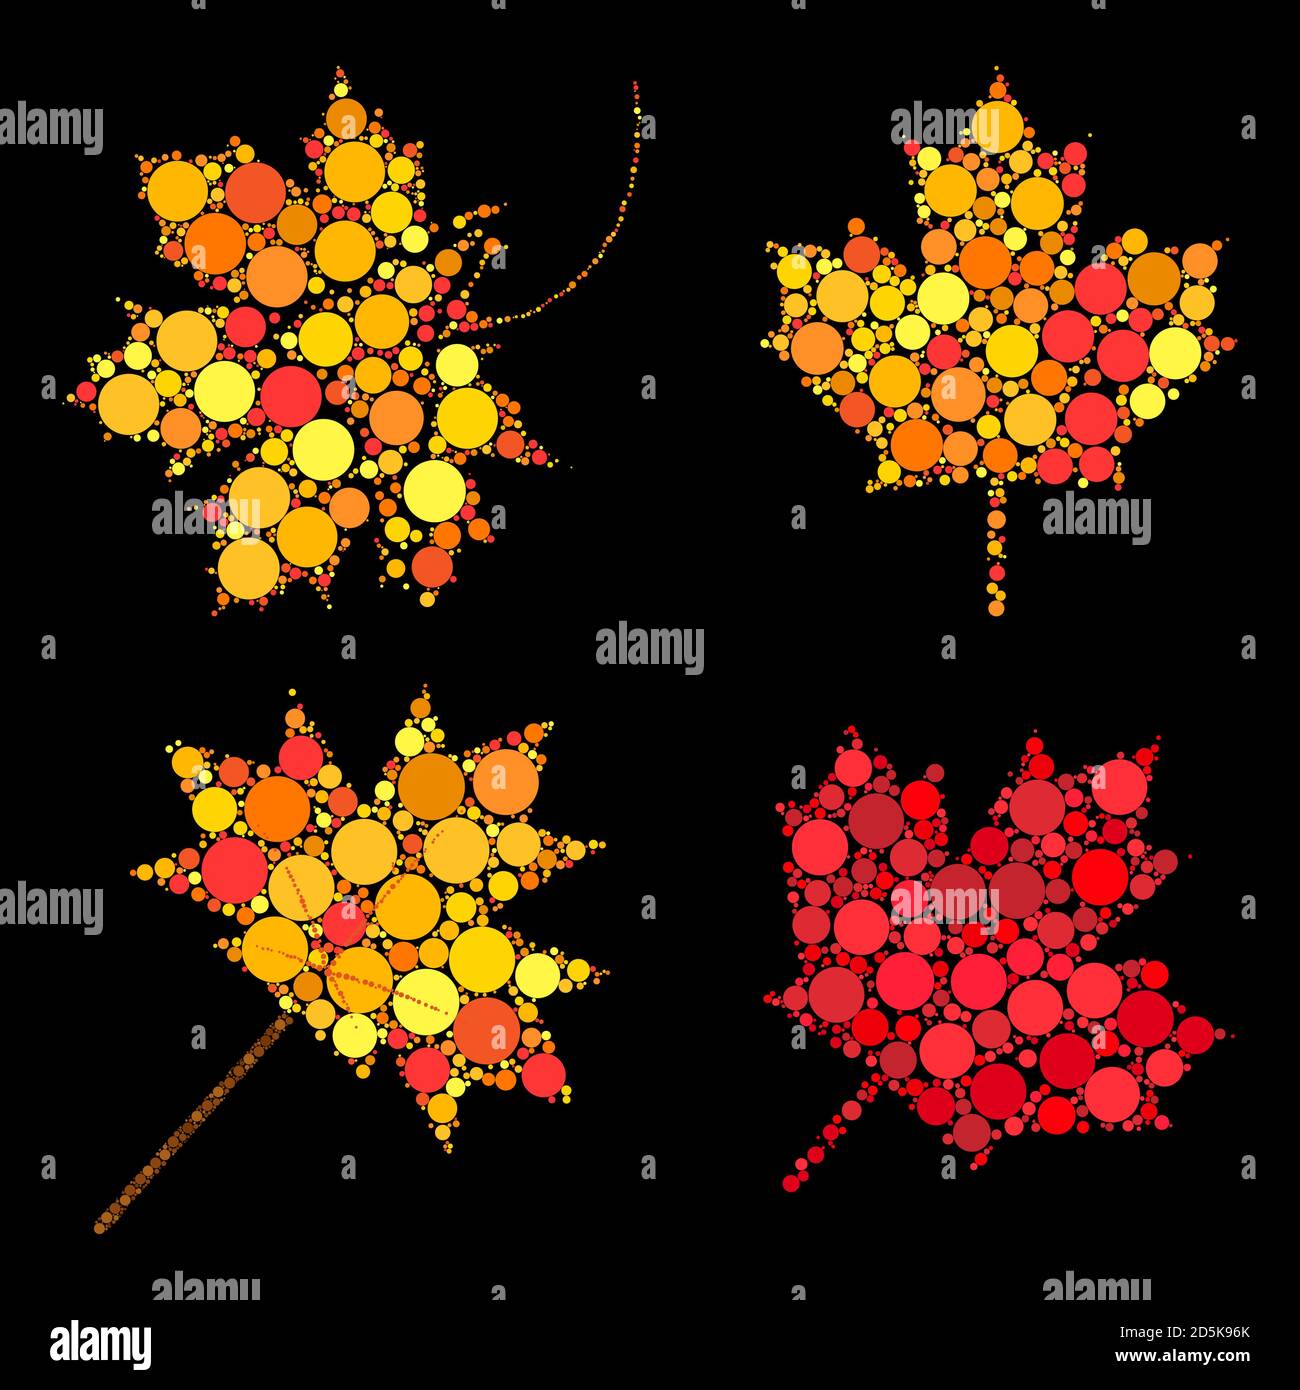 Autumn leaves. Abstract design elements collection. Vector set of autumnal maple leaf in fall colors. Seasonal foliage symbols set made of dots. Illus Stock Vector